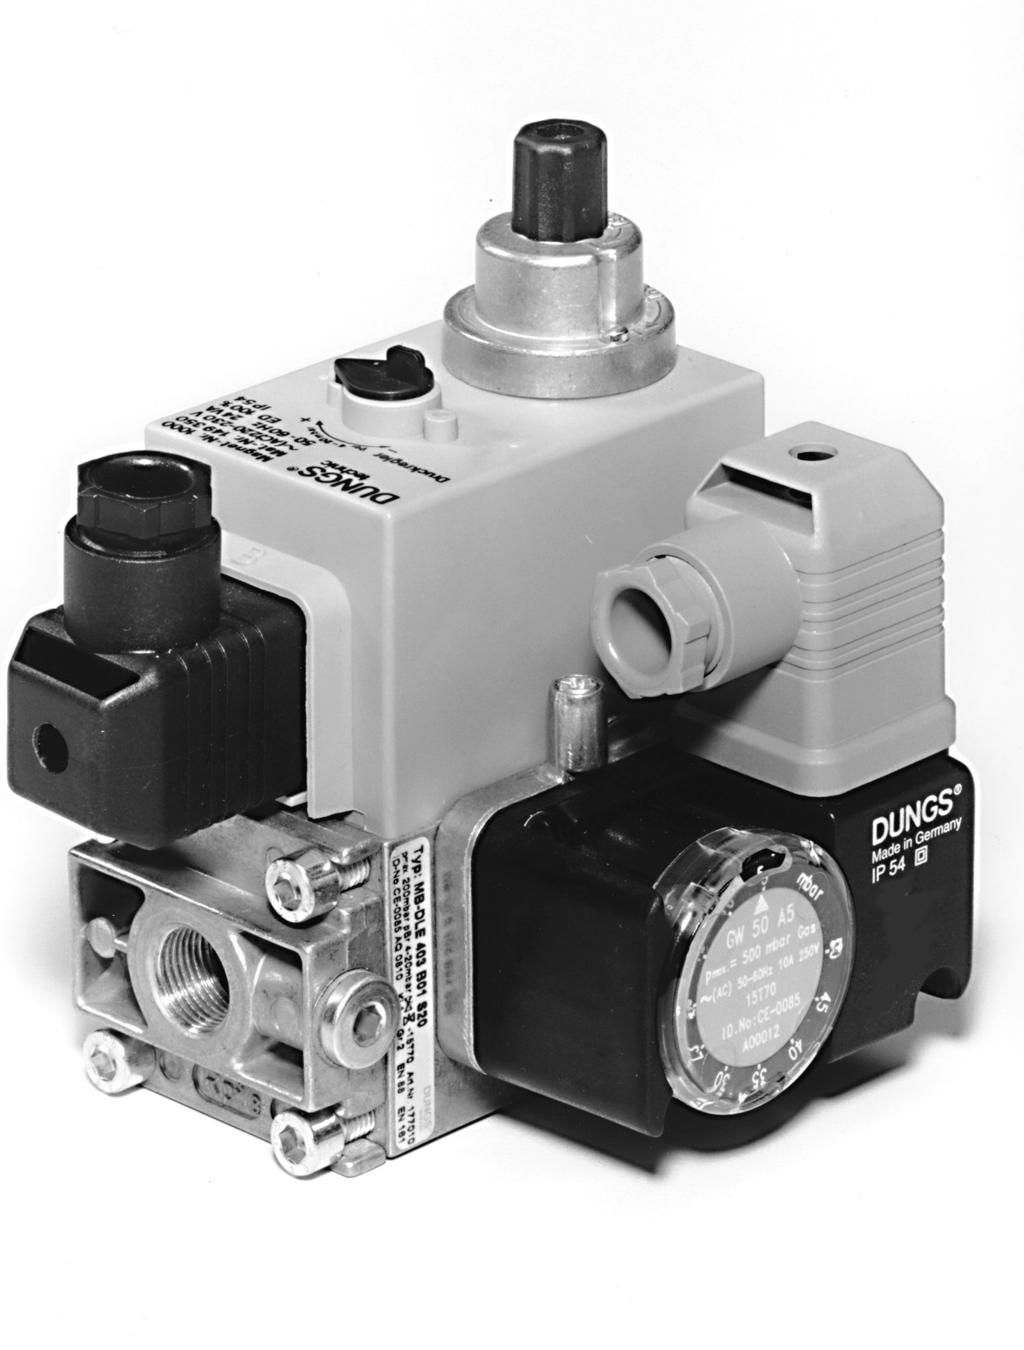 GasMultiBloc Combined regulator and safety shut-off valves Single-stage function MB-D(LE) 0 B0 7.0 Printed in Germany Edition 0.8 r.